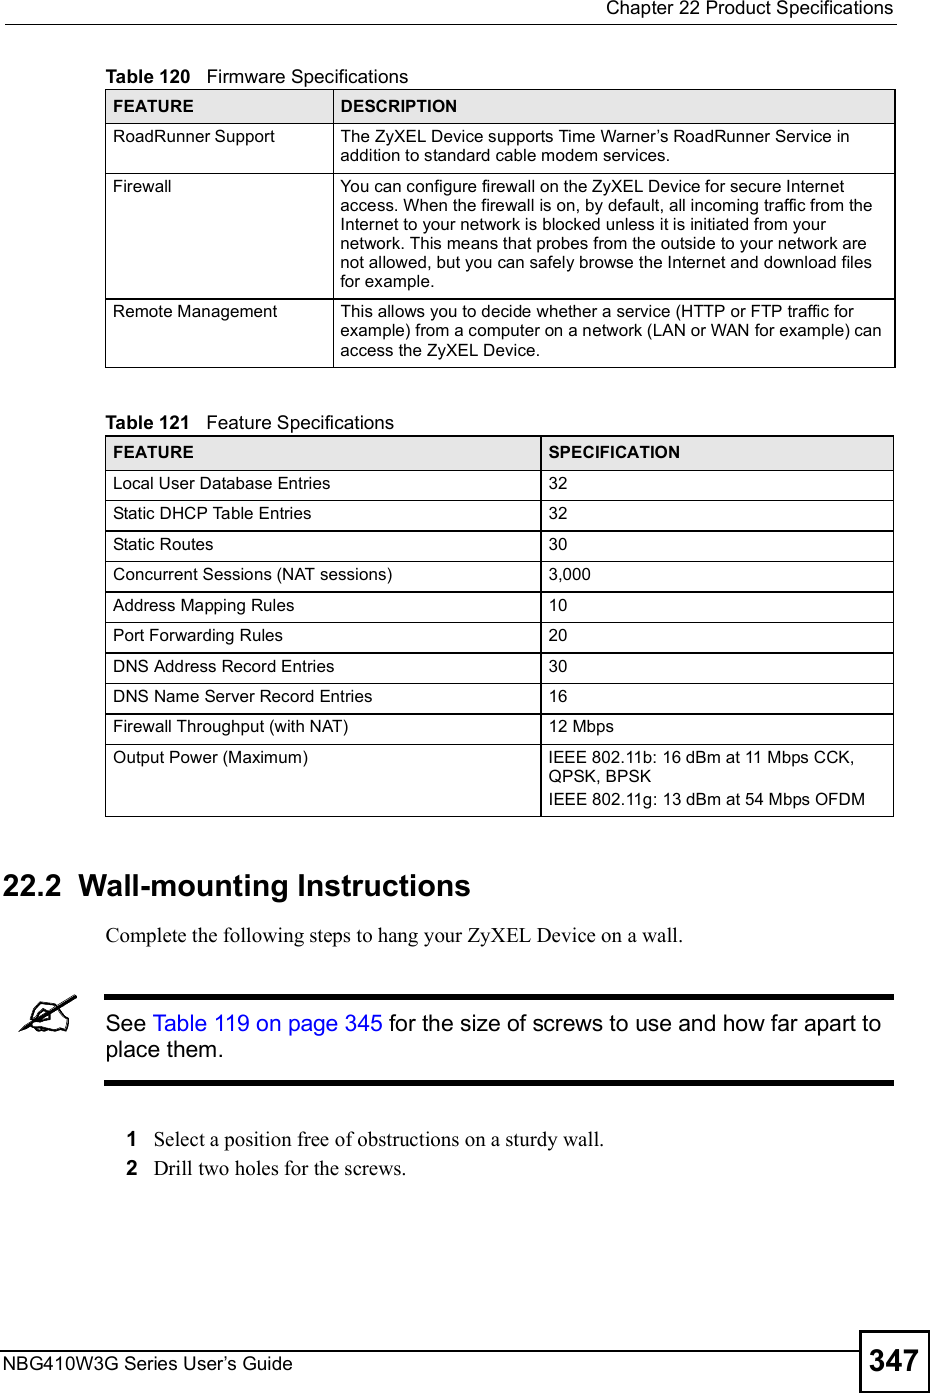  Chapter 22Product SpecificationsNBG410W3G Series User s Guide 347 22.2  Wall-mounting InstructionsComplete the following steps to hang your ZyXEL Device on a wall.See Table 119 on page 345 for the size of screws to use and how far apart to place them.1Select a position free of obstructions on a sturdy wall. 2Drill two holes for the screws. RoadRunner SupportThe ZyXEL Device supports Time Warner s RoadRunner Service in addition to standard cable modem services.FirewallYou can configure firewall on the ZyXEL Device for secure Internet access. When the firewall is on, by default, all incoming traffic from the Internet to your network is blocked unless it is initiated from your network. This means that probes from the outside to your network are not allowed, but you can safely browse the Internet and download files for example.Remote ManagementThis allows you to decide whether a service (HTTP or FTP traffic for example) from a computer on a network (LAN or WAN for example) can access the ZyXEL Device.Table 121   Feature Specifications FEATURE SPECIFICATIONLocal User Database Entries32Static DHCP Table Entries32Static Routes30Concurrent Sessions (NAT sessions)3,000 Address Mapping Rules10Port Forwarding Rules20DNS Address Record Entries30DNS Name Server Record Entries16Firewall Throughput (with NAT) 12 MbpsOutput Power (Maximum)IEEE 802.11b: 16 dBm at 11 Mbps CCK, QPSK, BPSKIEEE 802.11g: 13 dBm at 54 Mbps OFDMTable 120   Firmware Specifications FEATURE DESCRIPTION